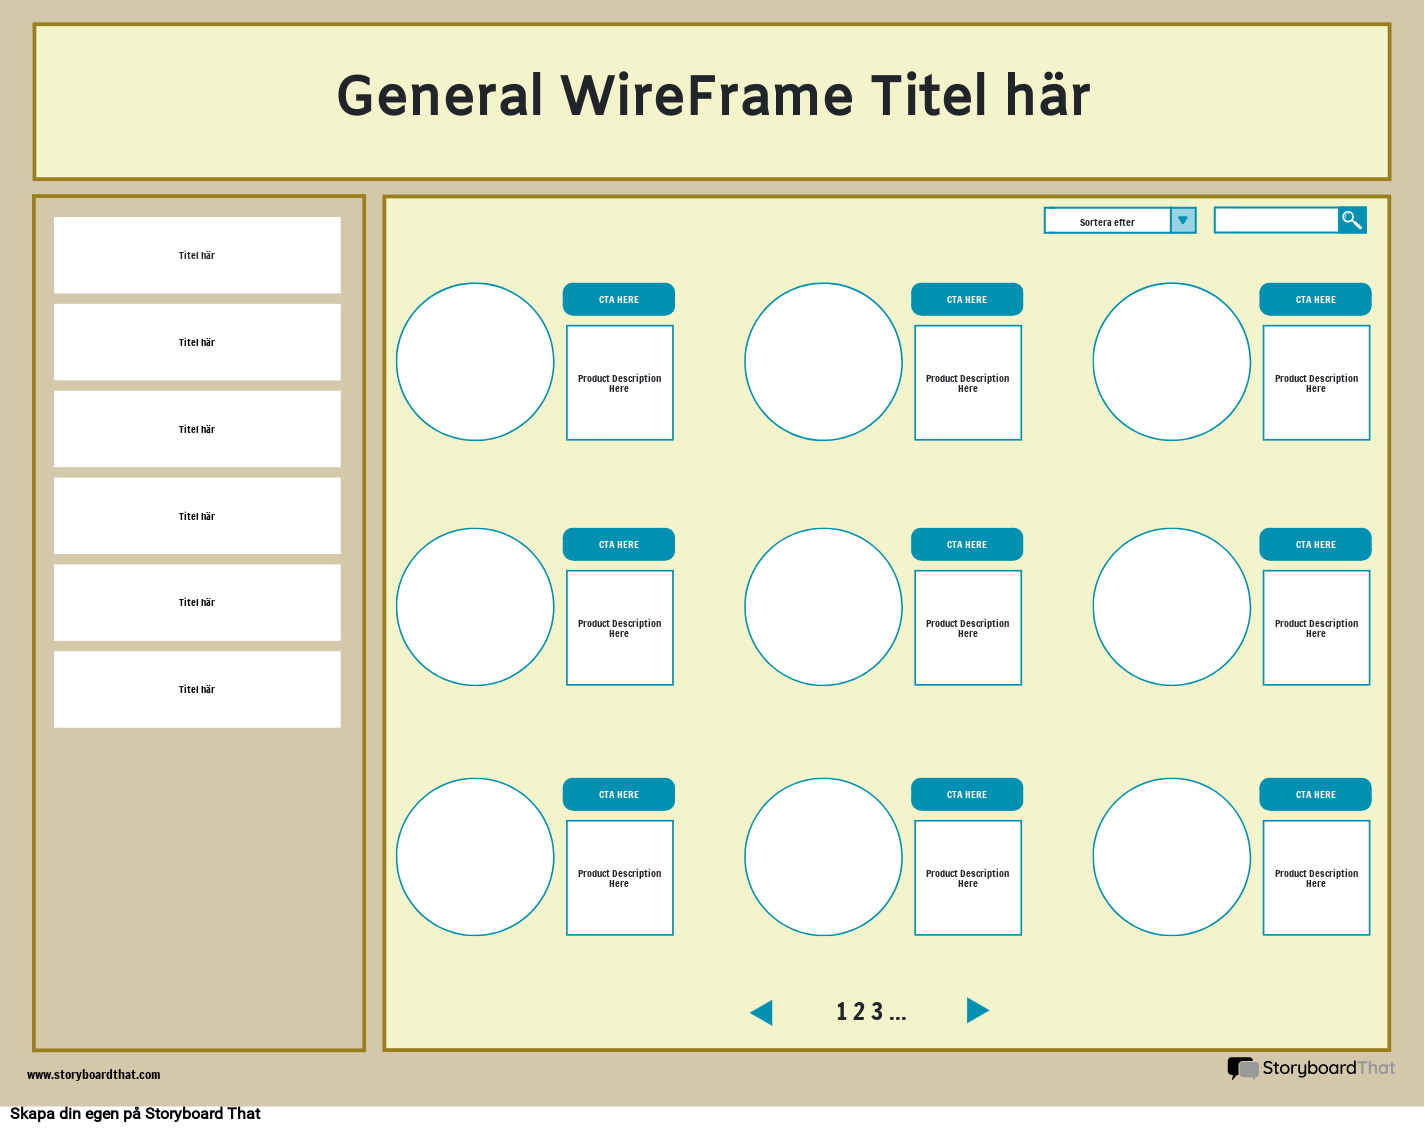 Corporate General WireFrame Mall 1